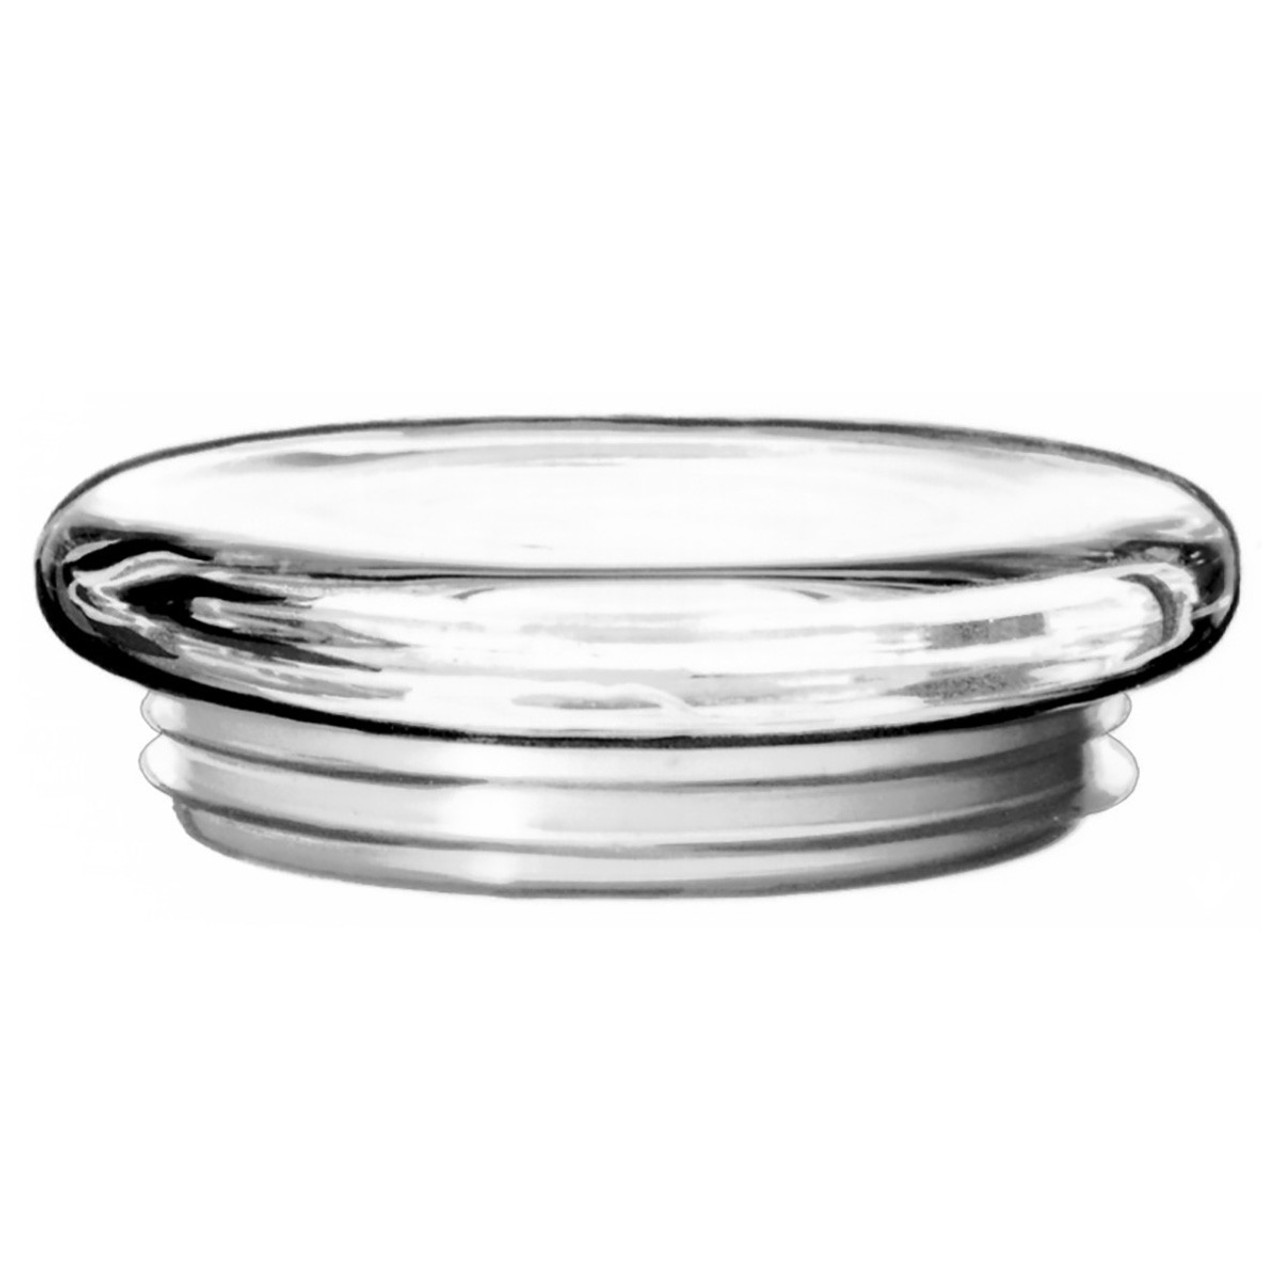 Candle Making Supplies  PVC CANDLE JAR LIDS - FITS TALL GLASS 1000 PCS -  Candle Making Supplies